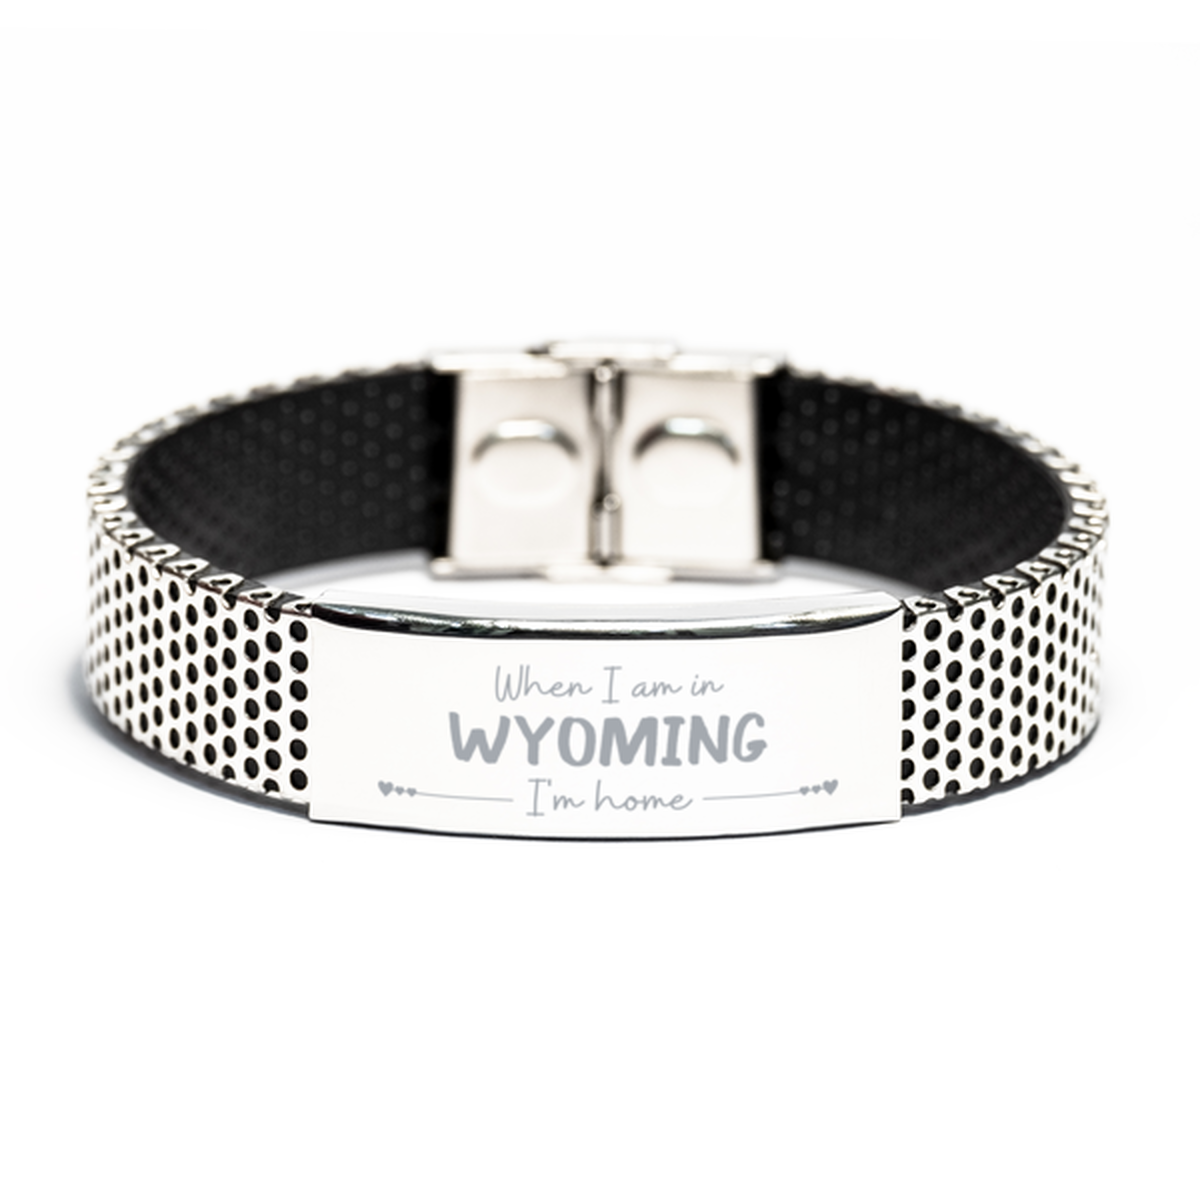 When I am in Wyoming I'm home Stainless Steel Bracelet, Cheap Gifts For Wyoming, State Wyoming Birthday Gifts for Friends Coworker